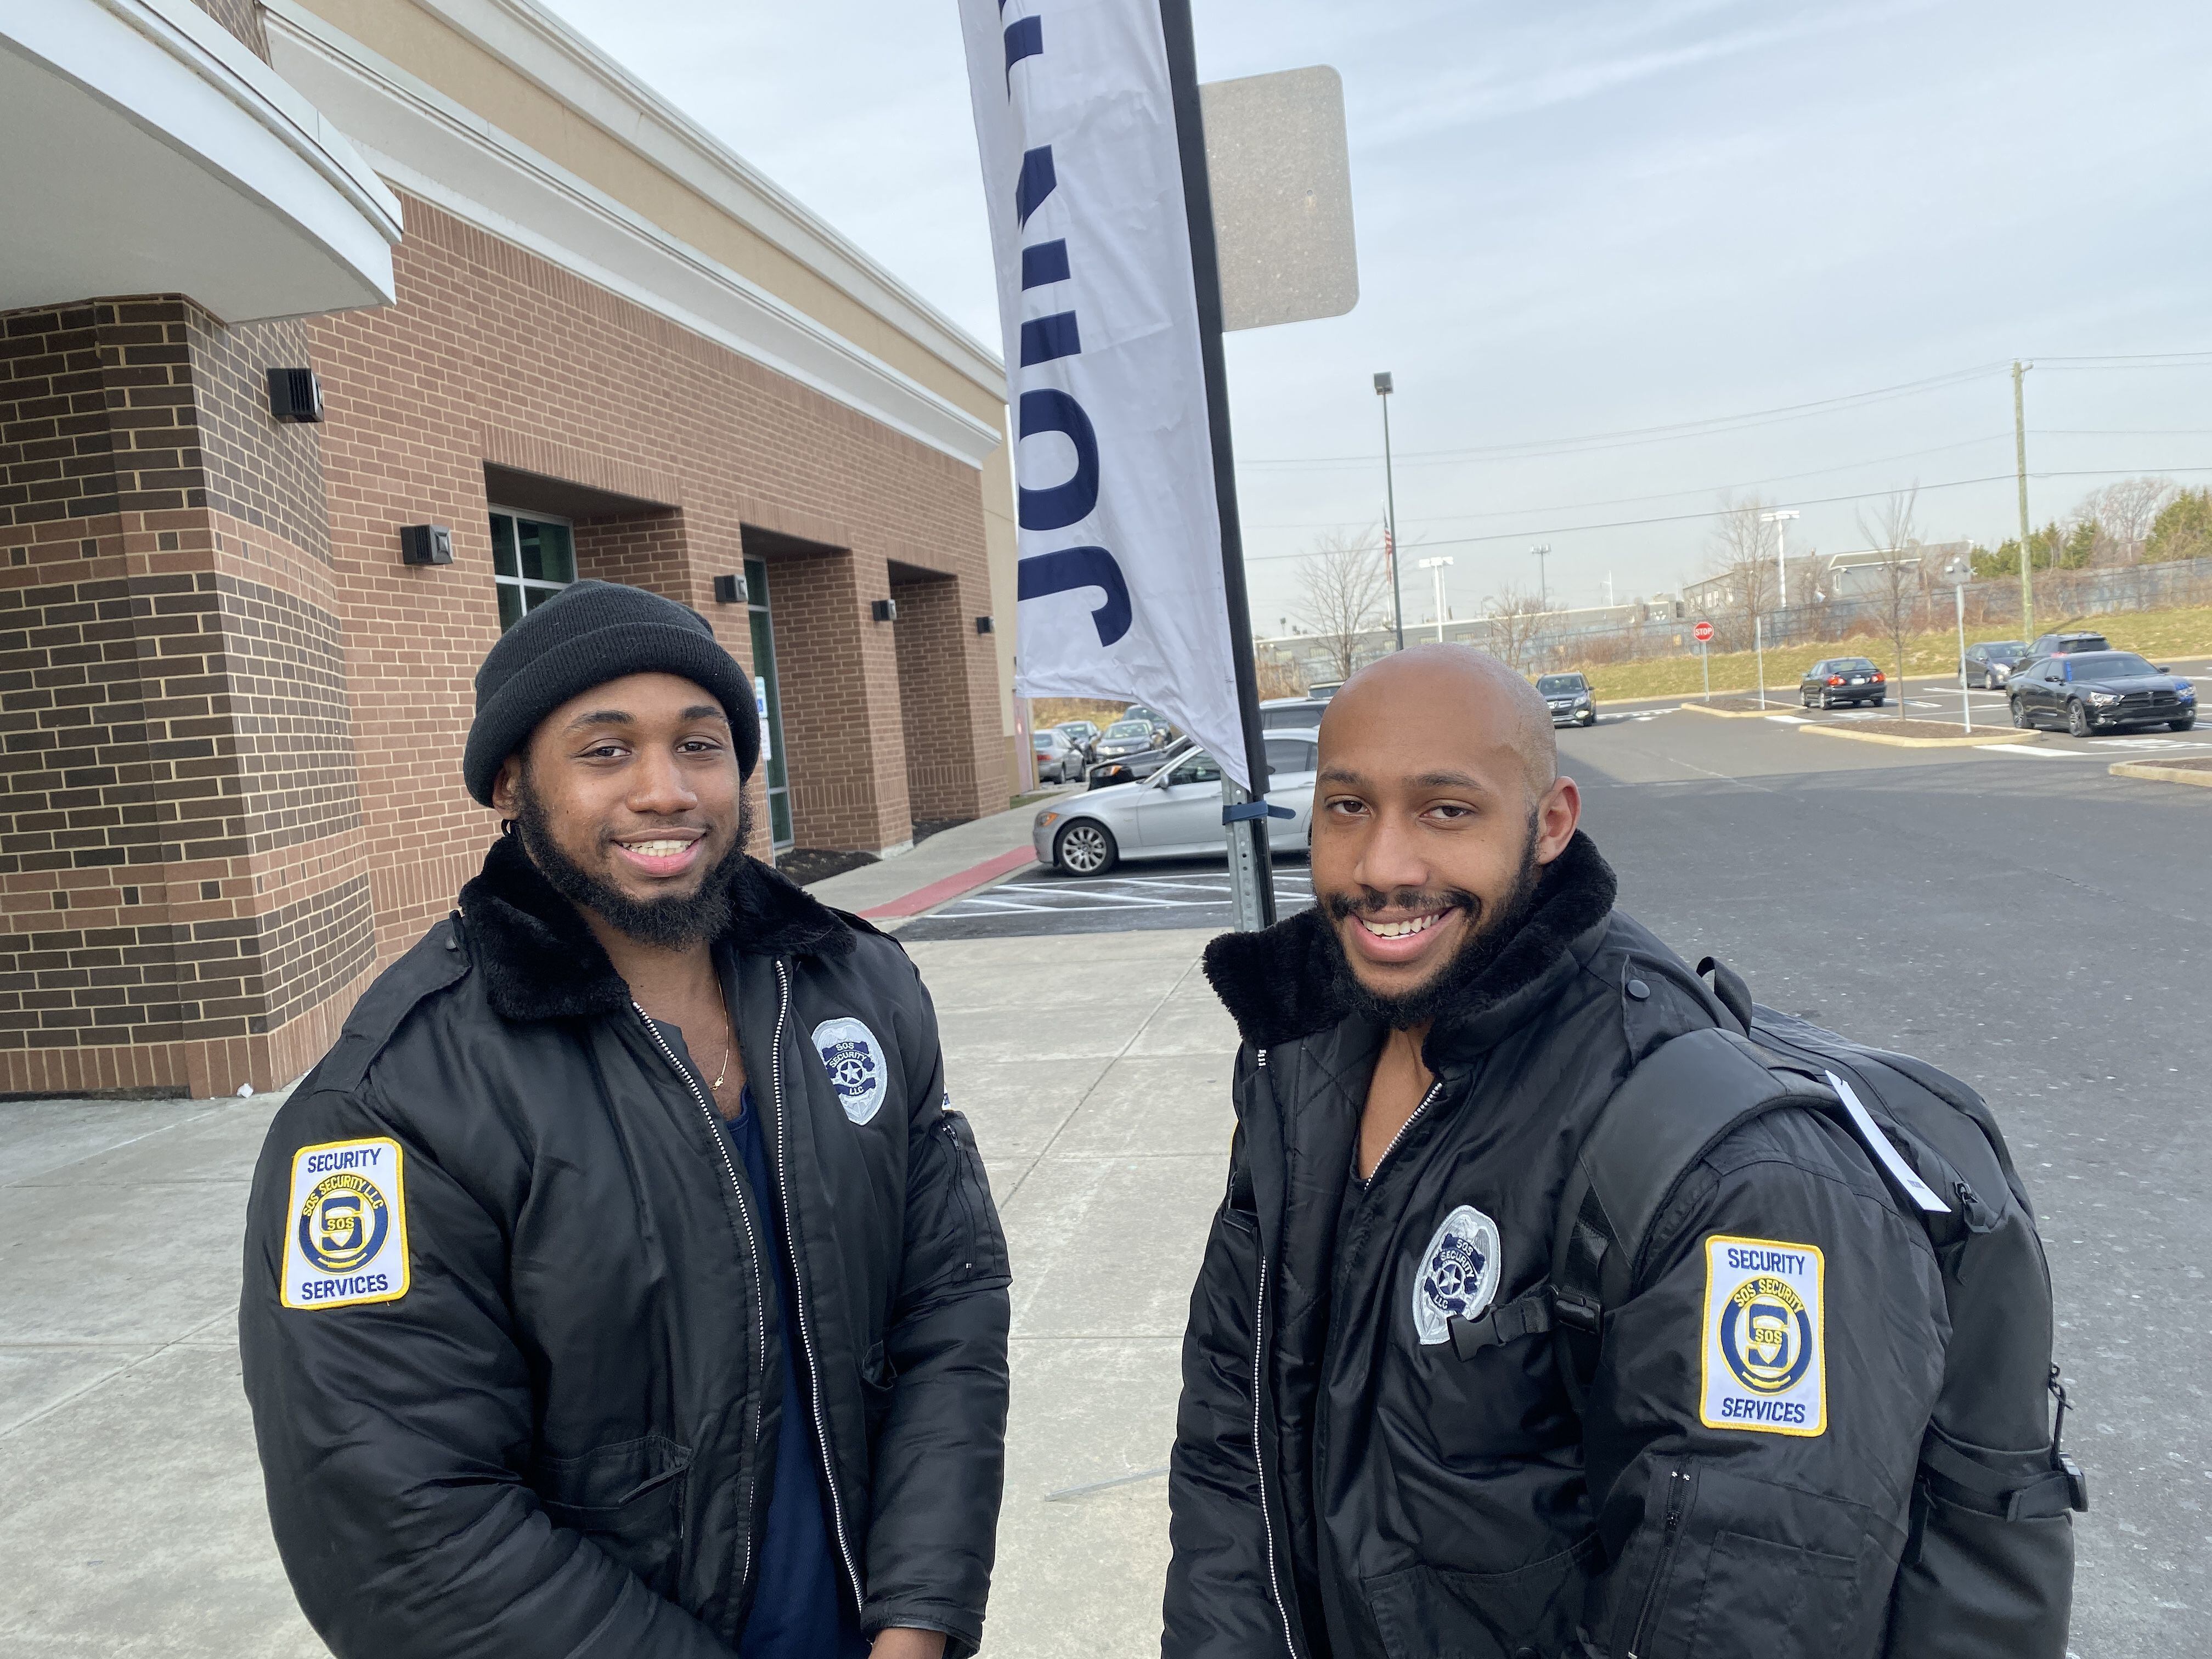 At LA Fitness in Northeast Philly, police recruiting seems a heavy lift